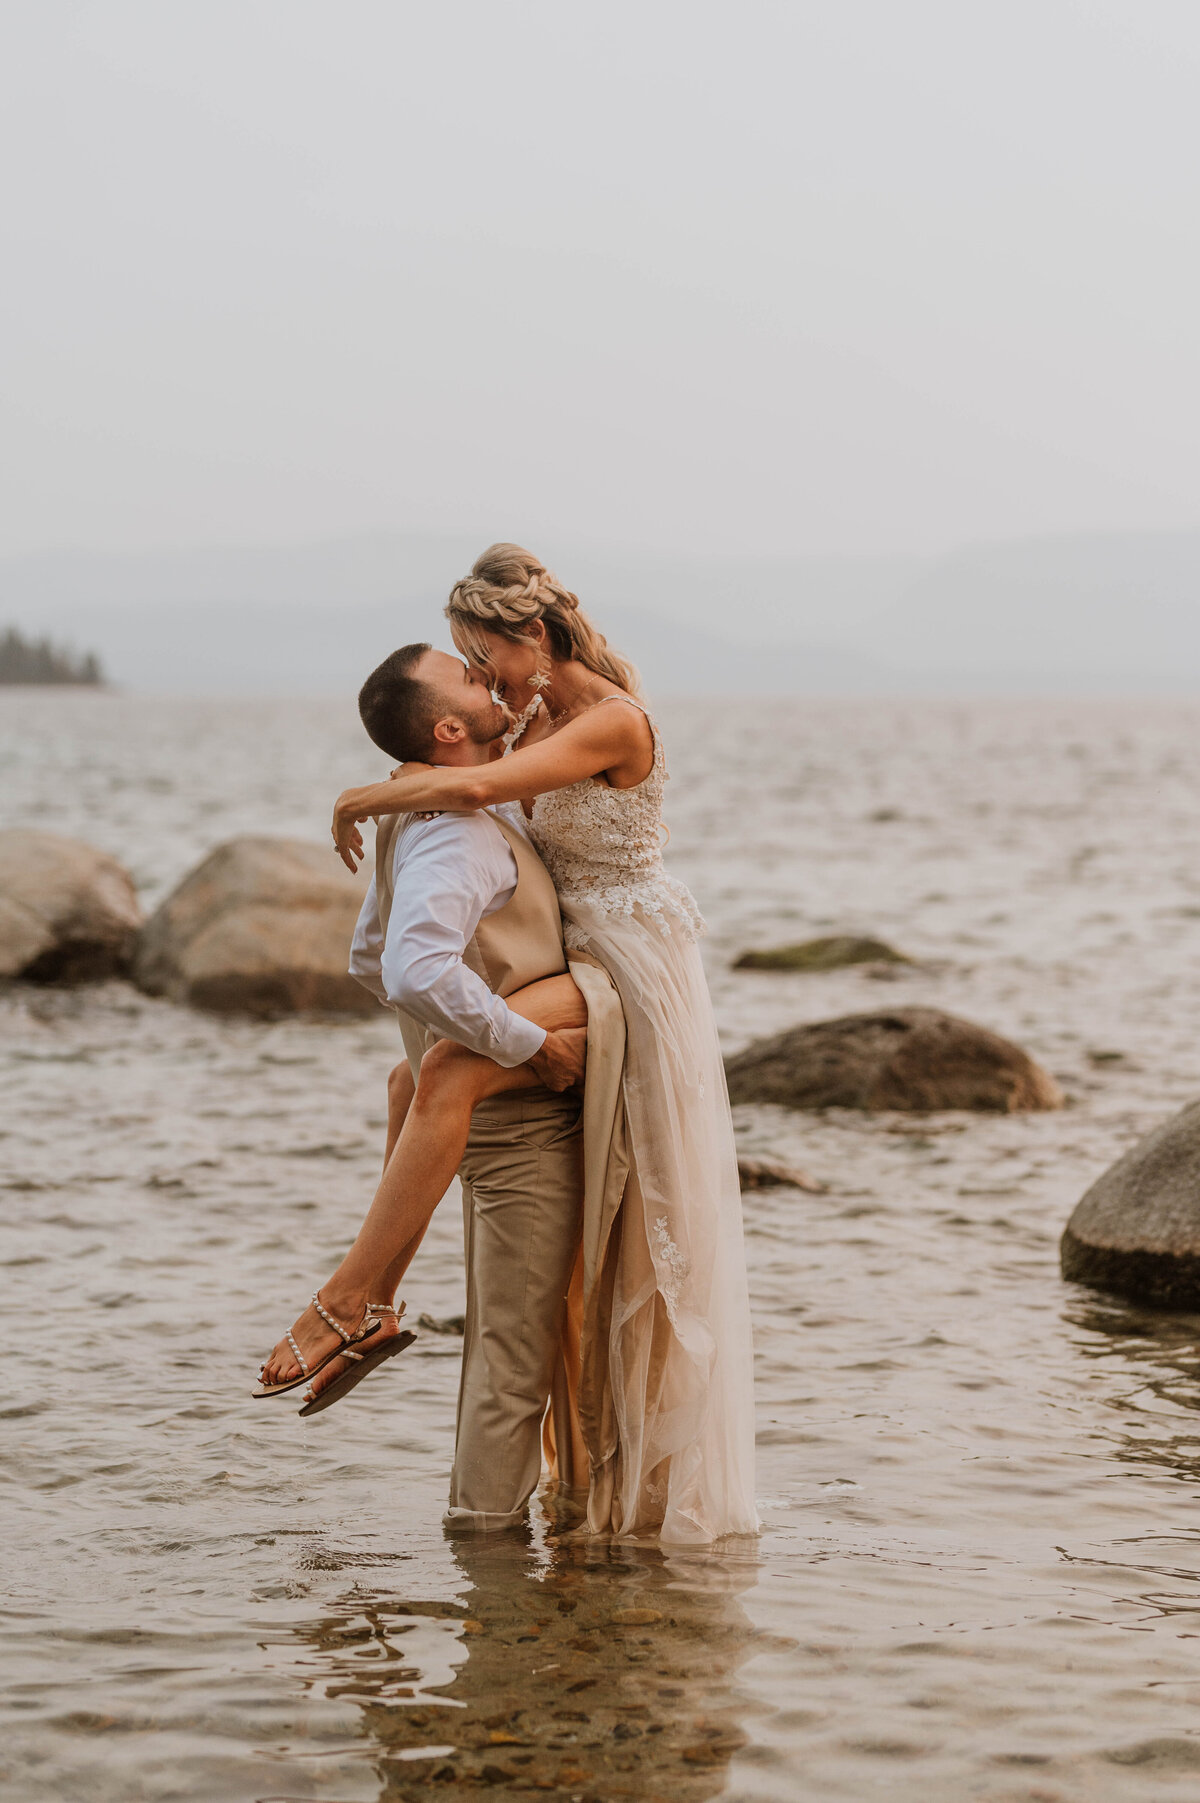 A wedding couple kissing in the Lake Tahoe waters